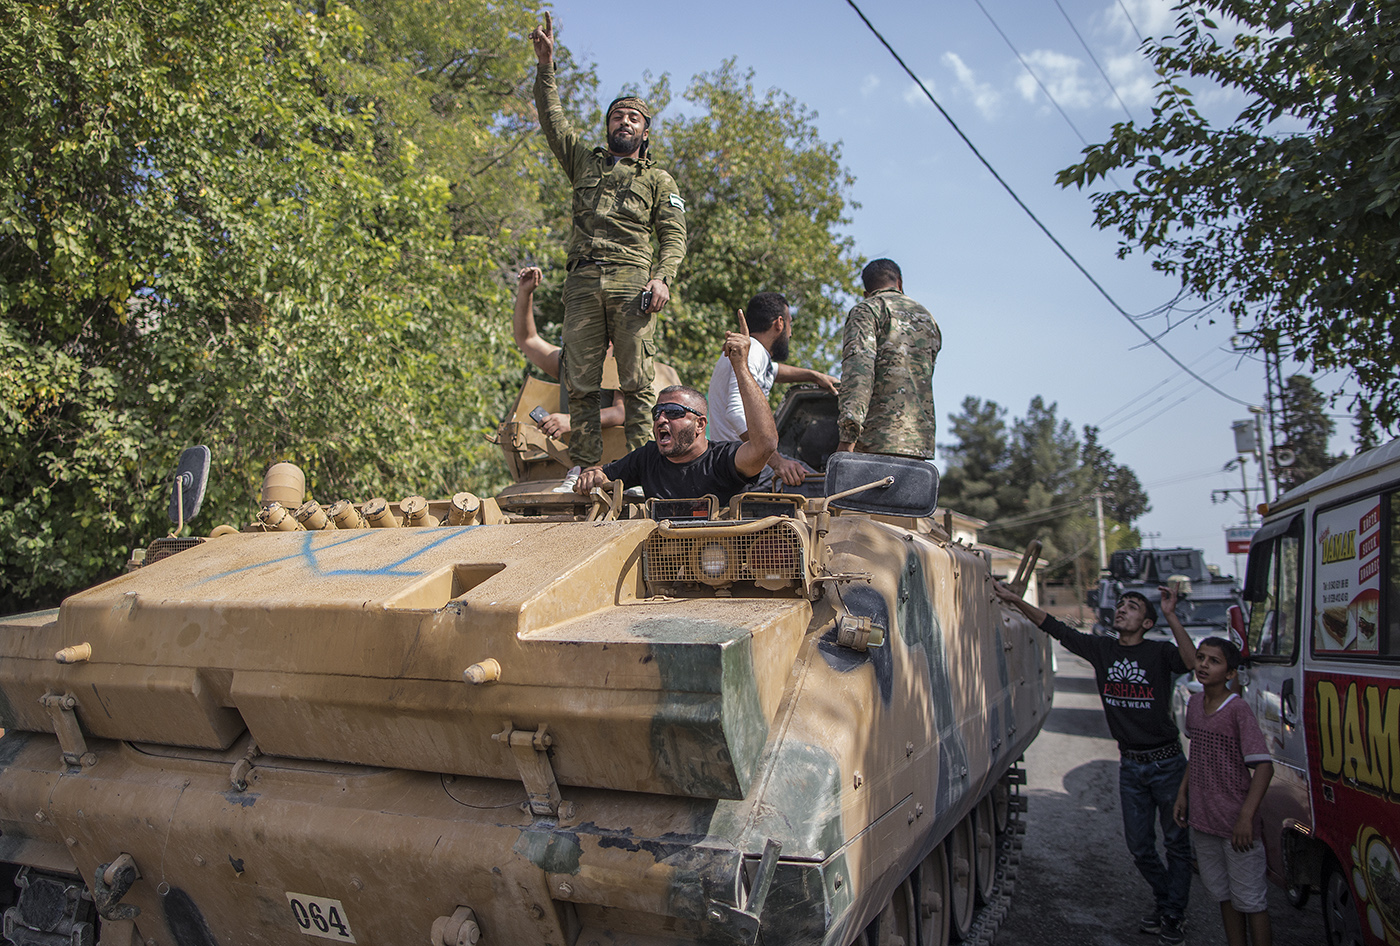 Turkish-backed Syrian fighters drive armored vehicles from Northern Syria for a military operation in Kurdish areas, near the Syrian border, in Akcakale district in Sanliurfa, Turkey, 18 October 2019. 